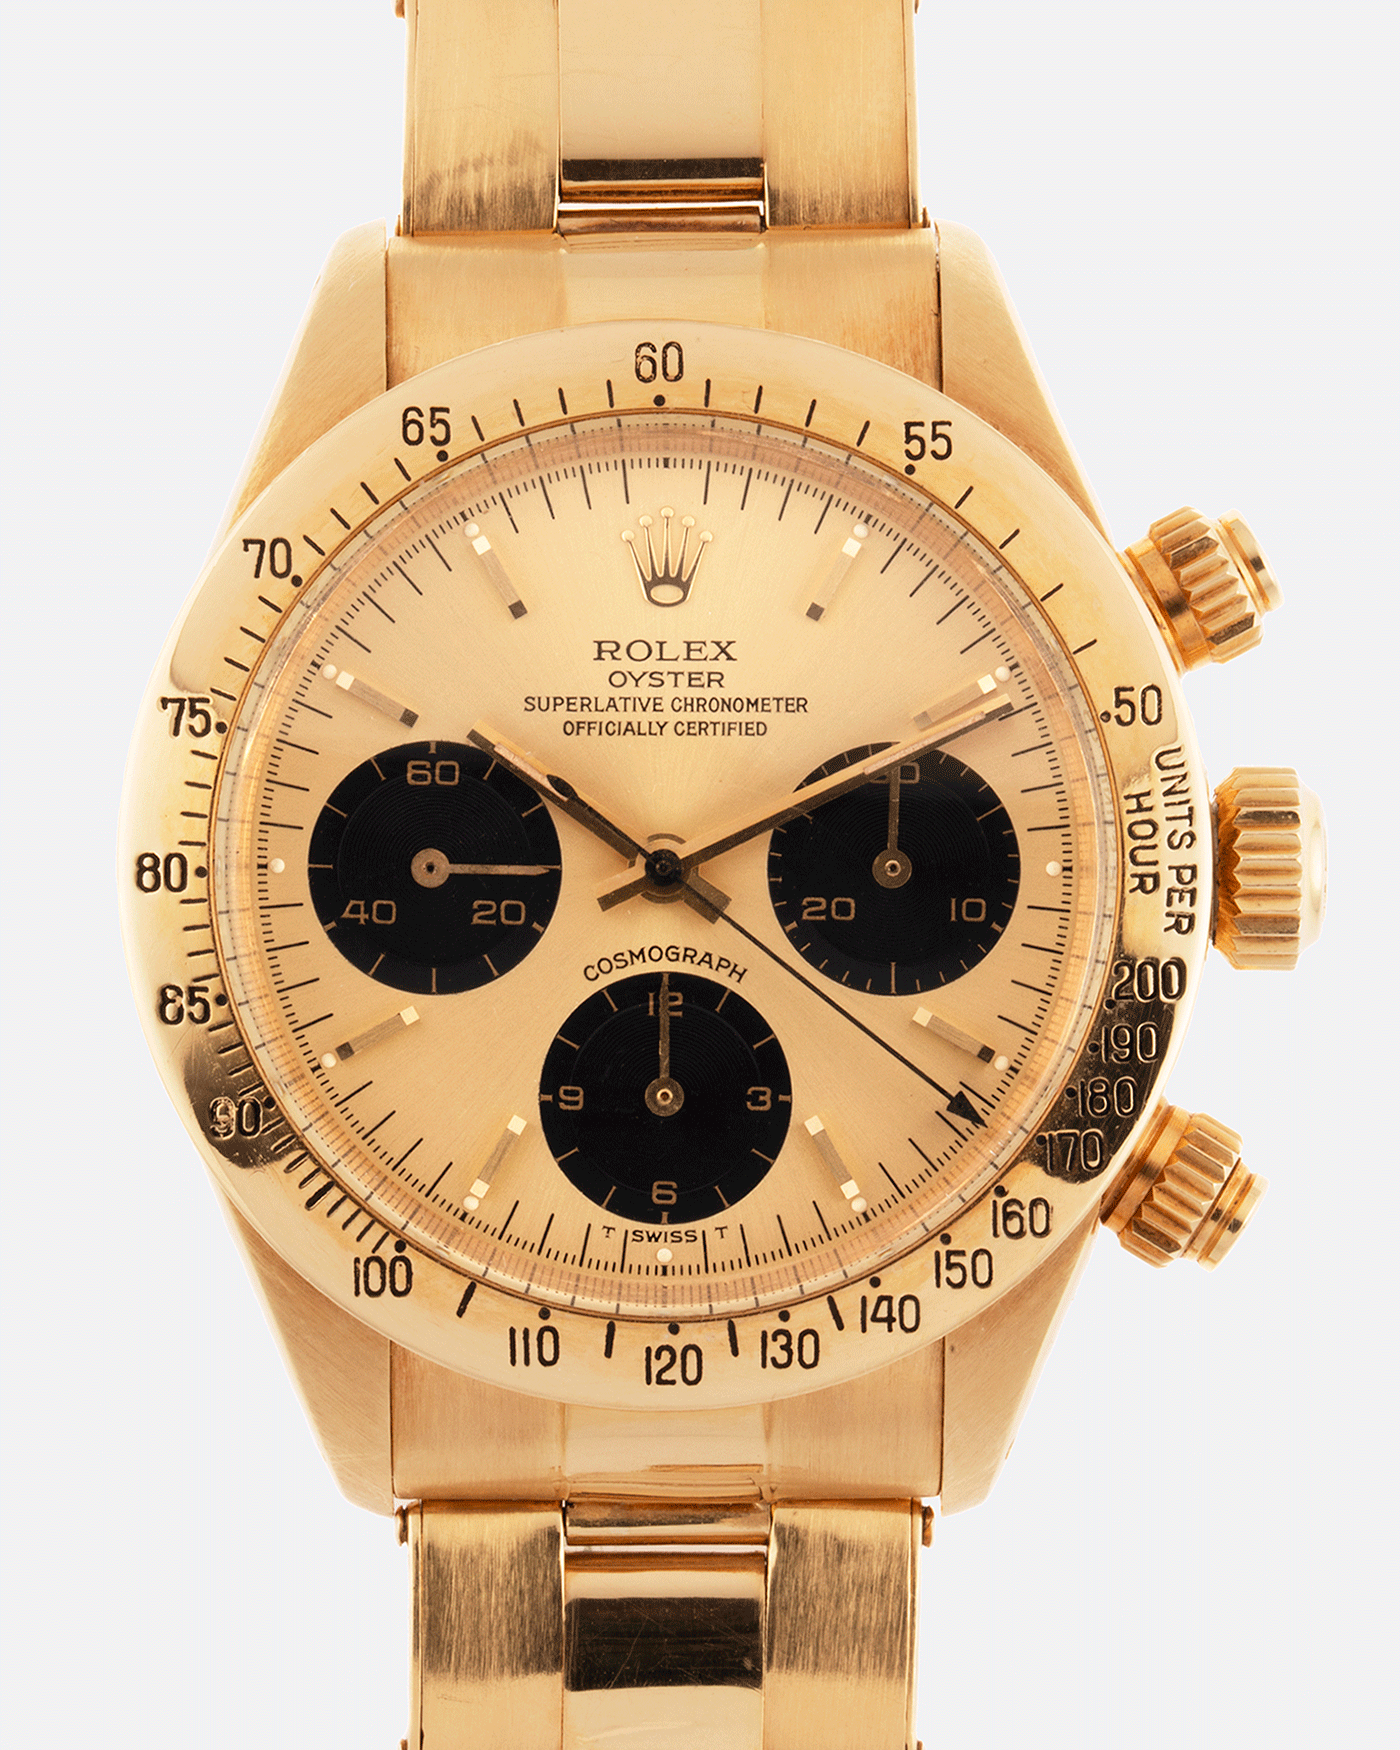 Rolex Cosmograph Daytona 6265 Vintage Yellow Gold Chronograph Watch | S.Song Vintage Timepieces \